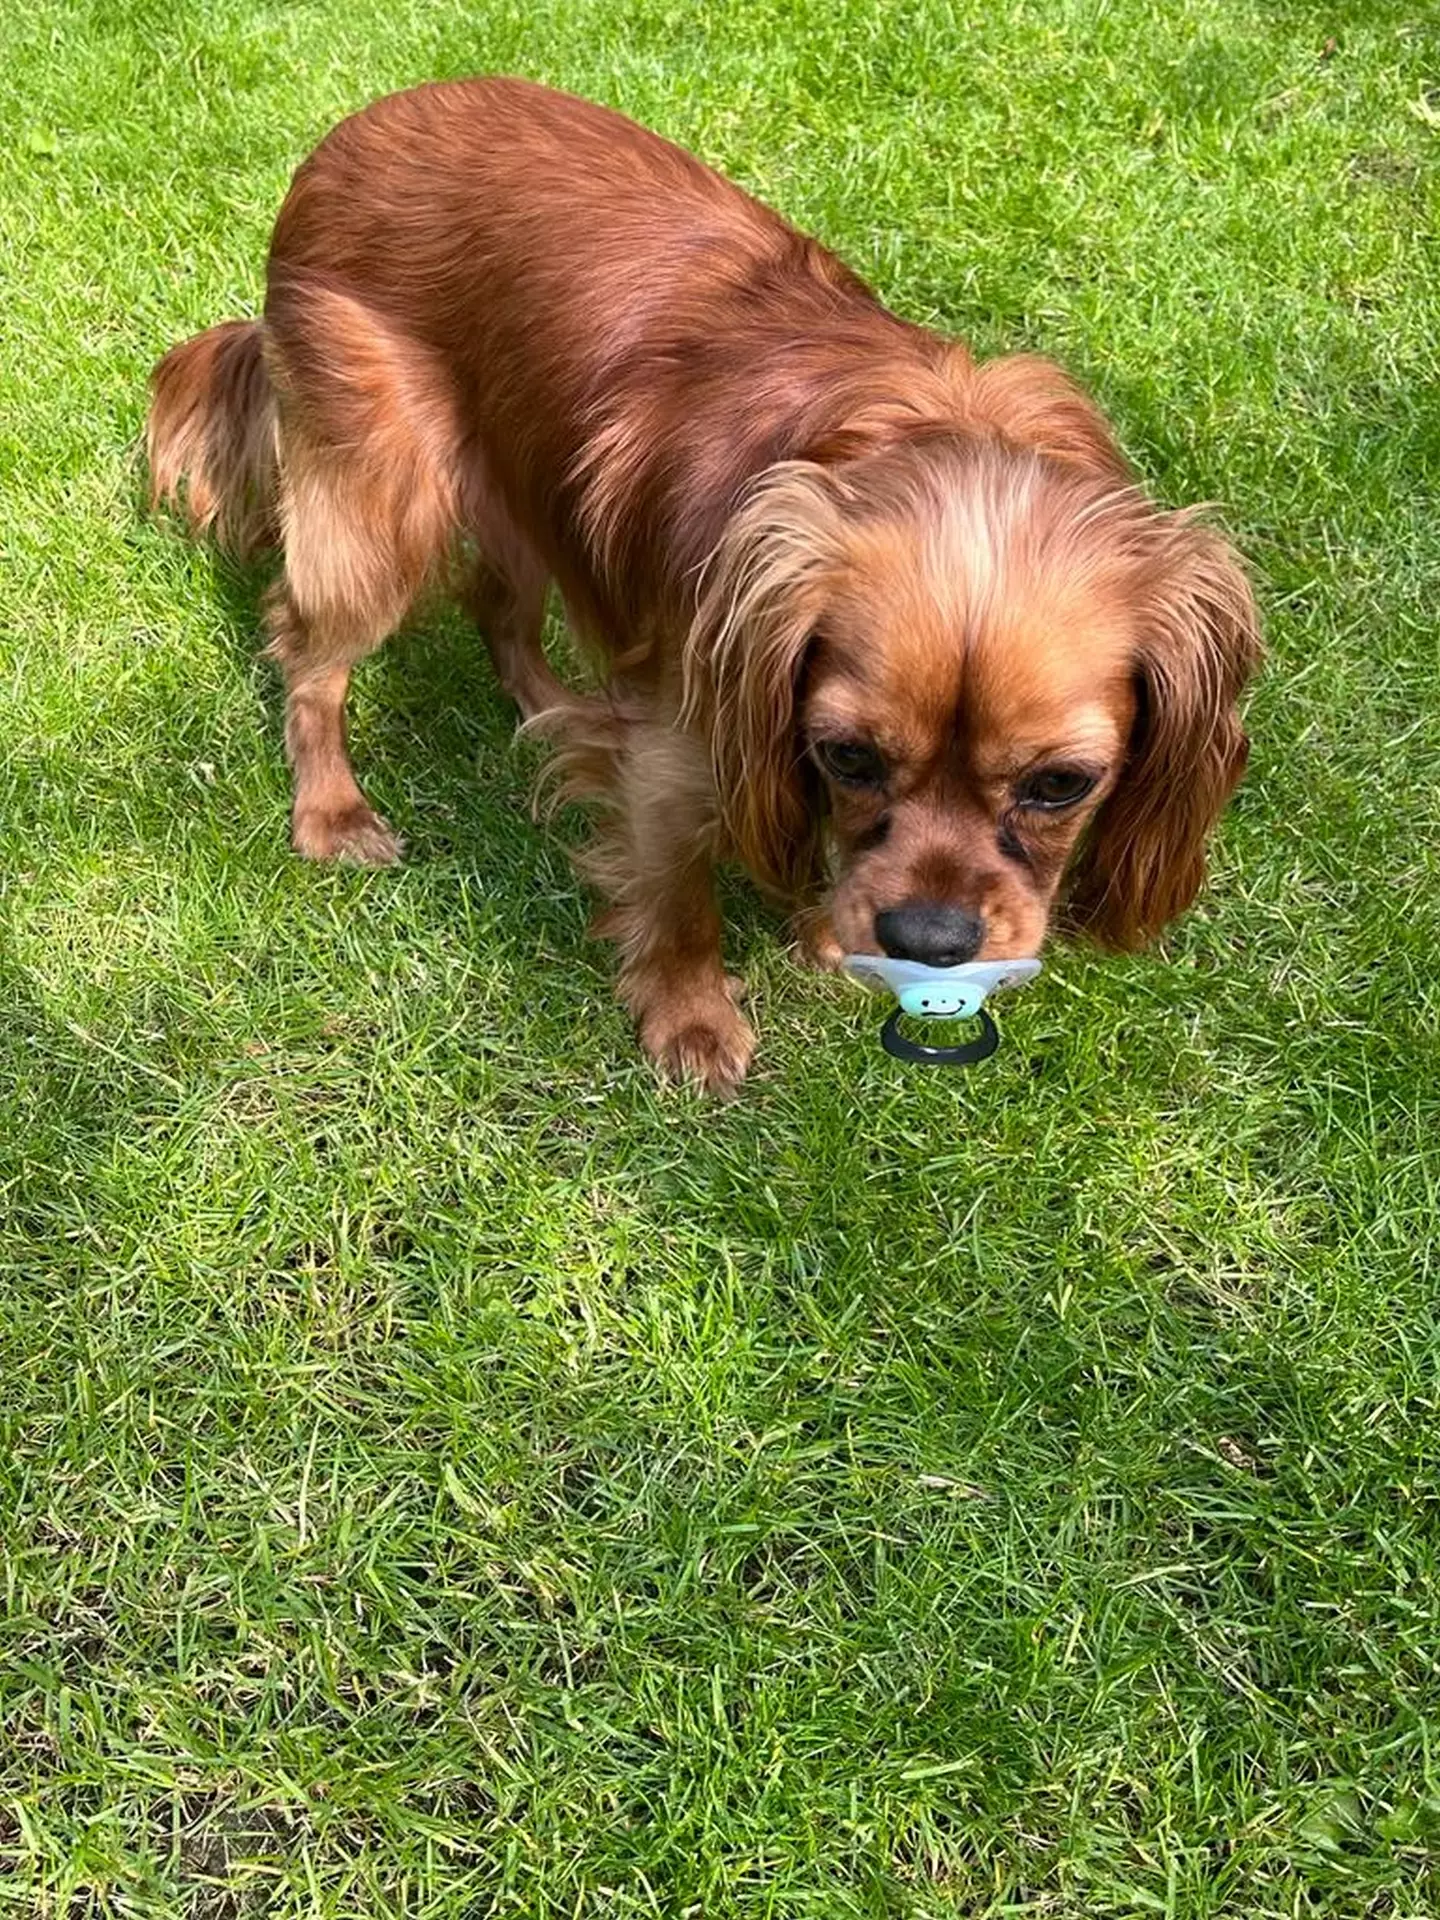 Gemma has to chase Rafa around the garden to get the pacifier back.